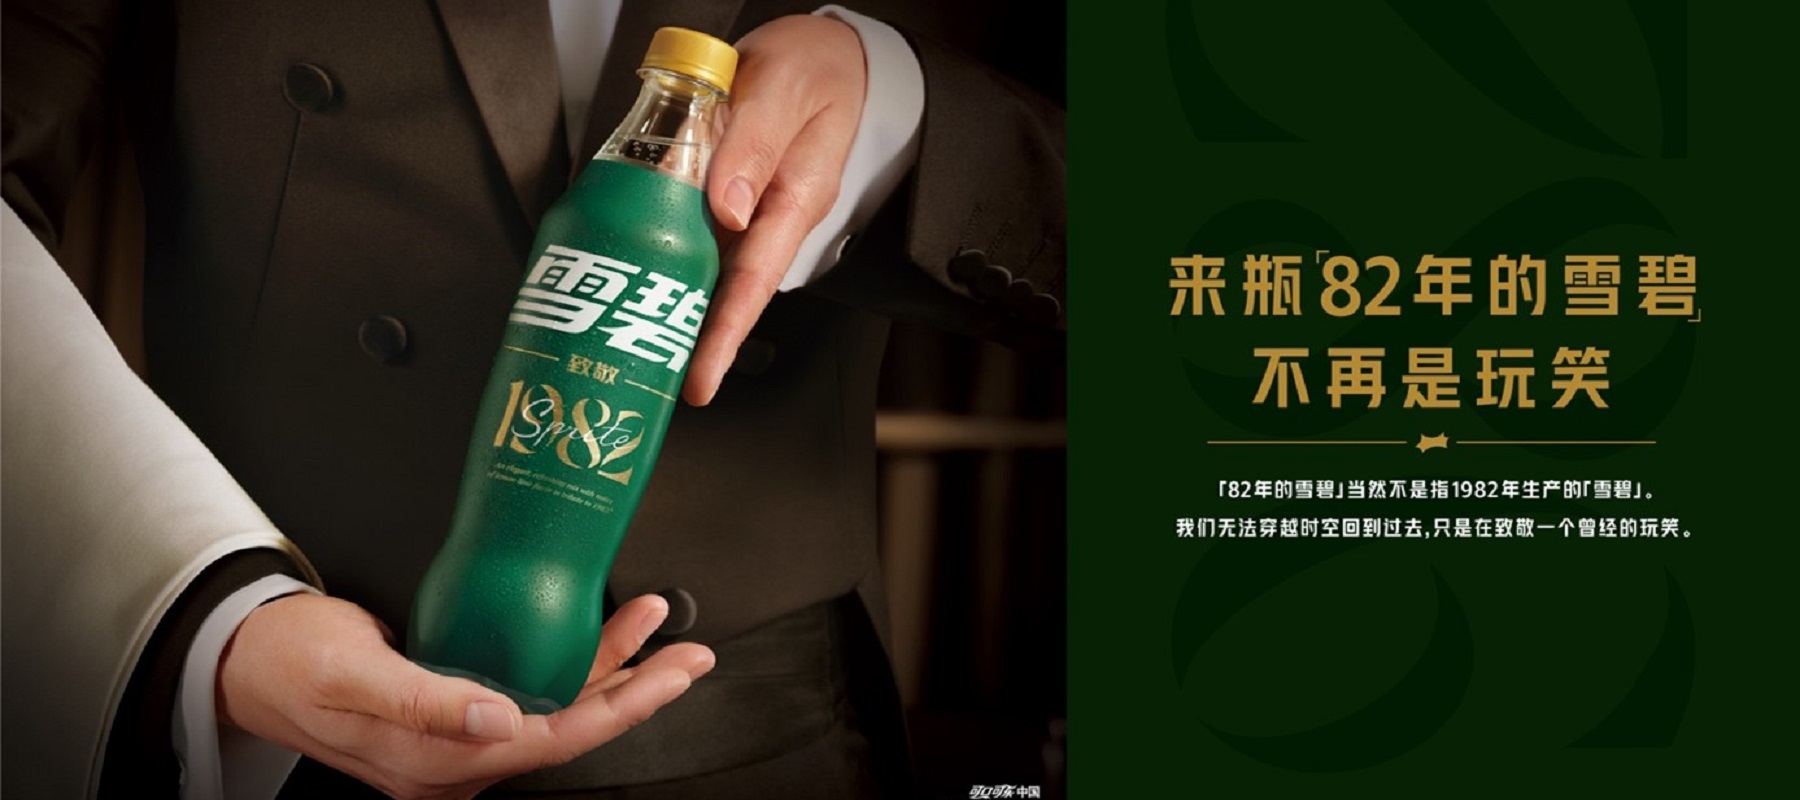 Sprite and WPP tap into Chinese meme culture with the launch of ‘1982 Sprite’ campaign